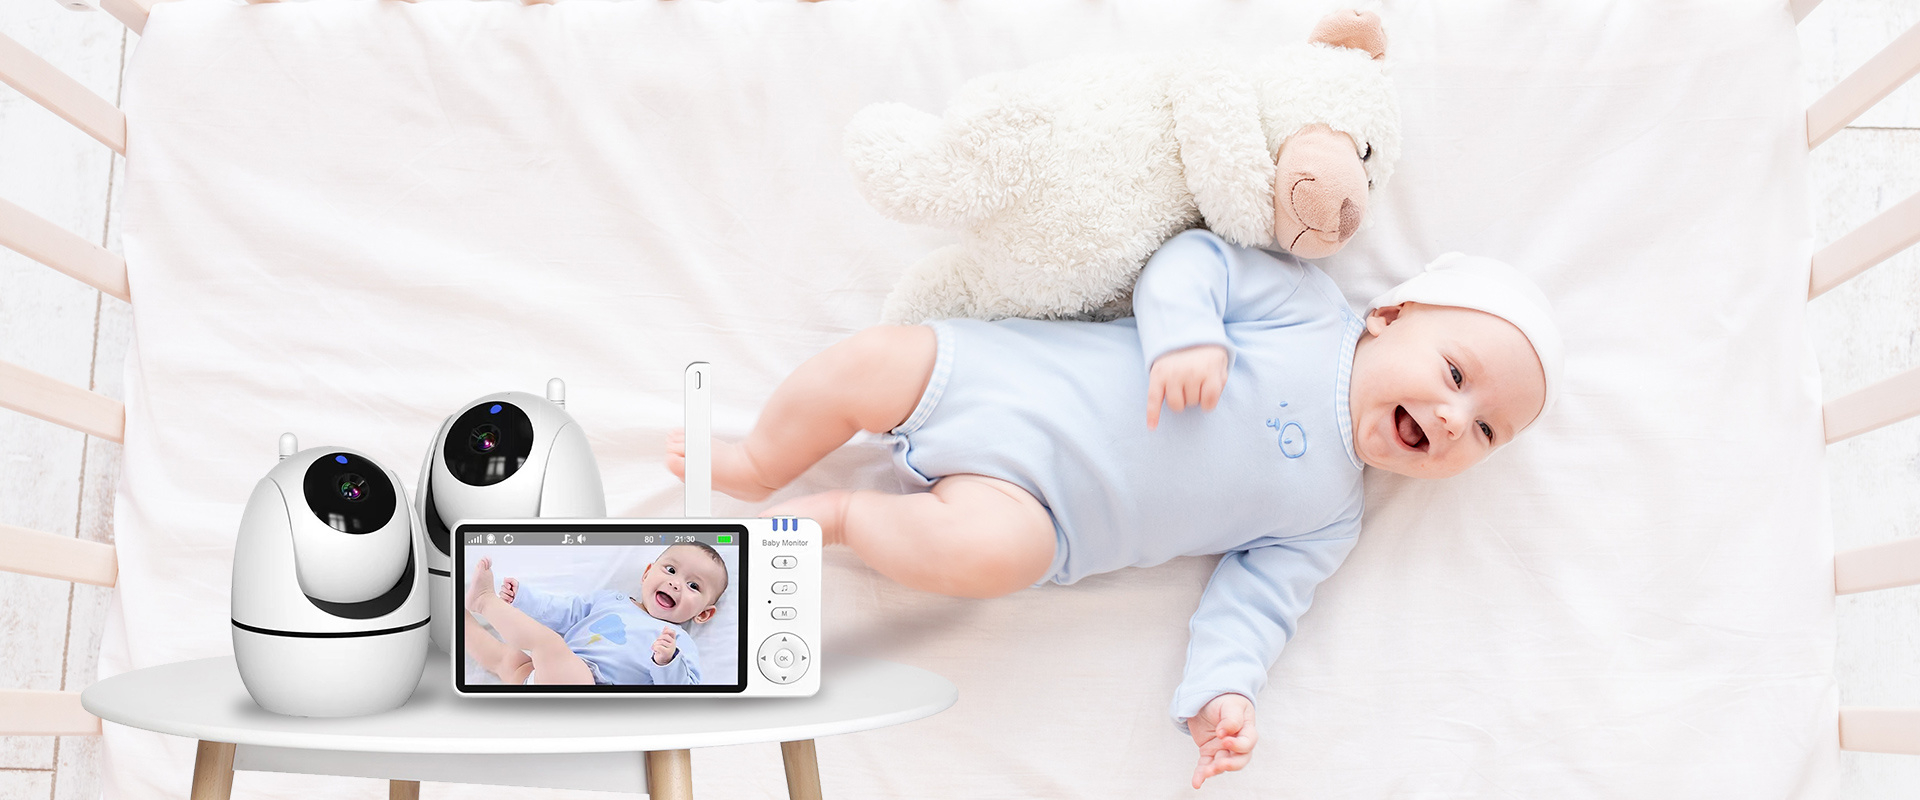 One-stop Advanced Baby Monitoring Solutions